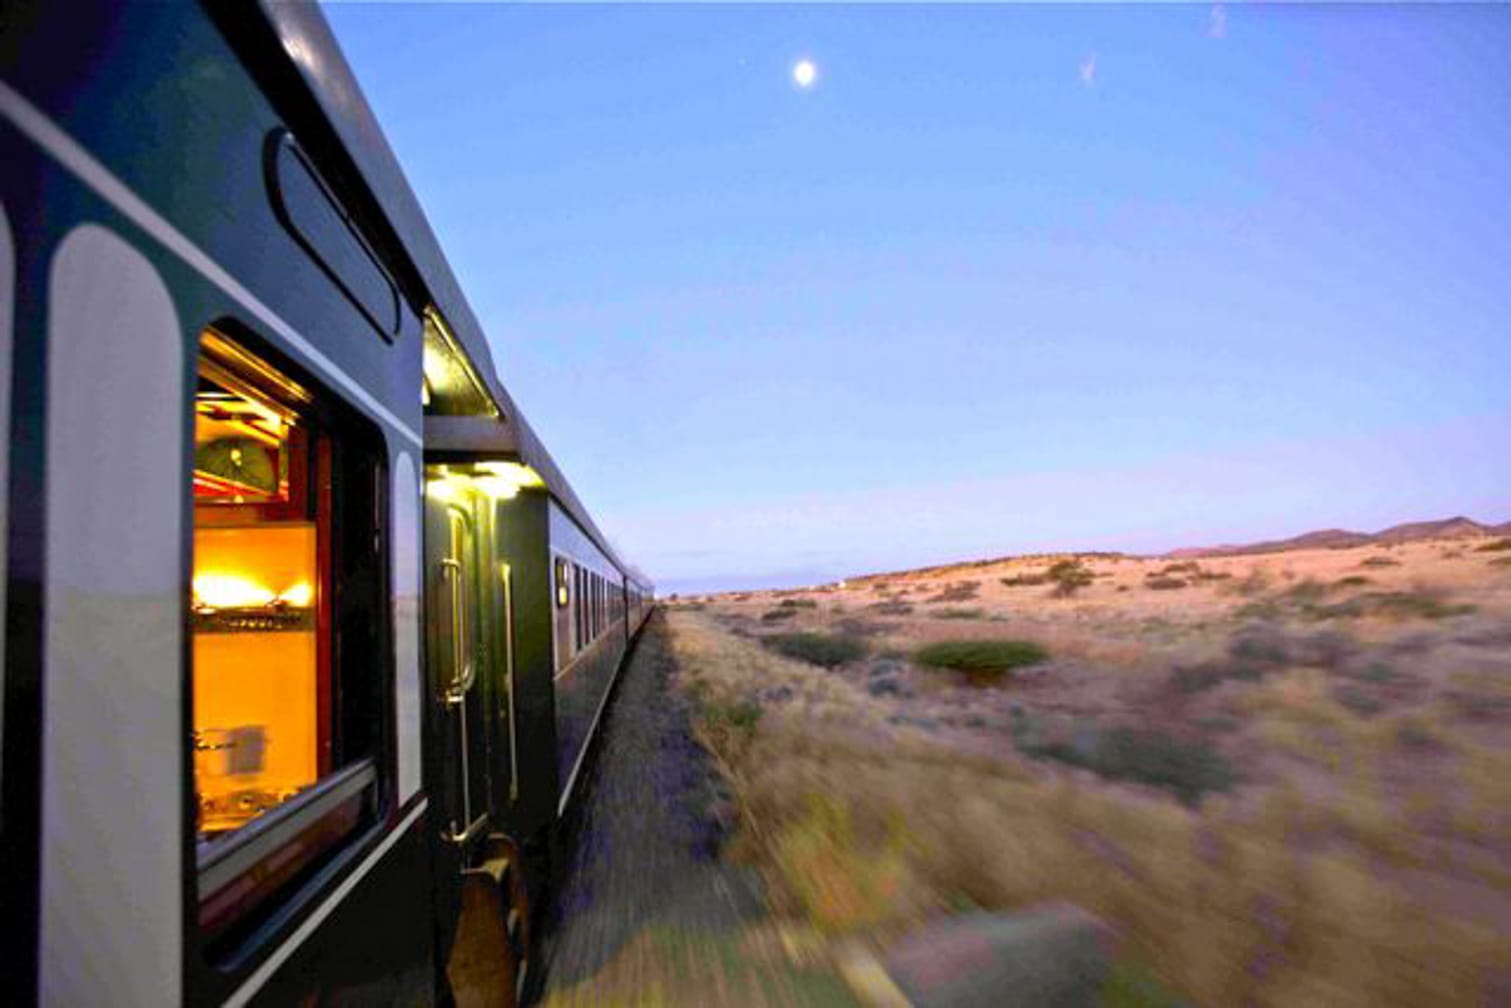 Train on the Namibia Safari by Luxury Train aboard Rovos Rail’s Pride of Africa journey